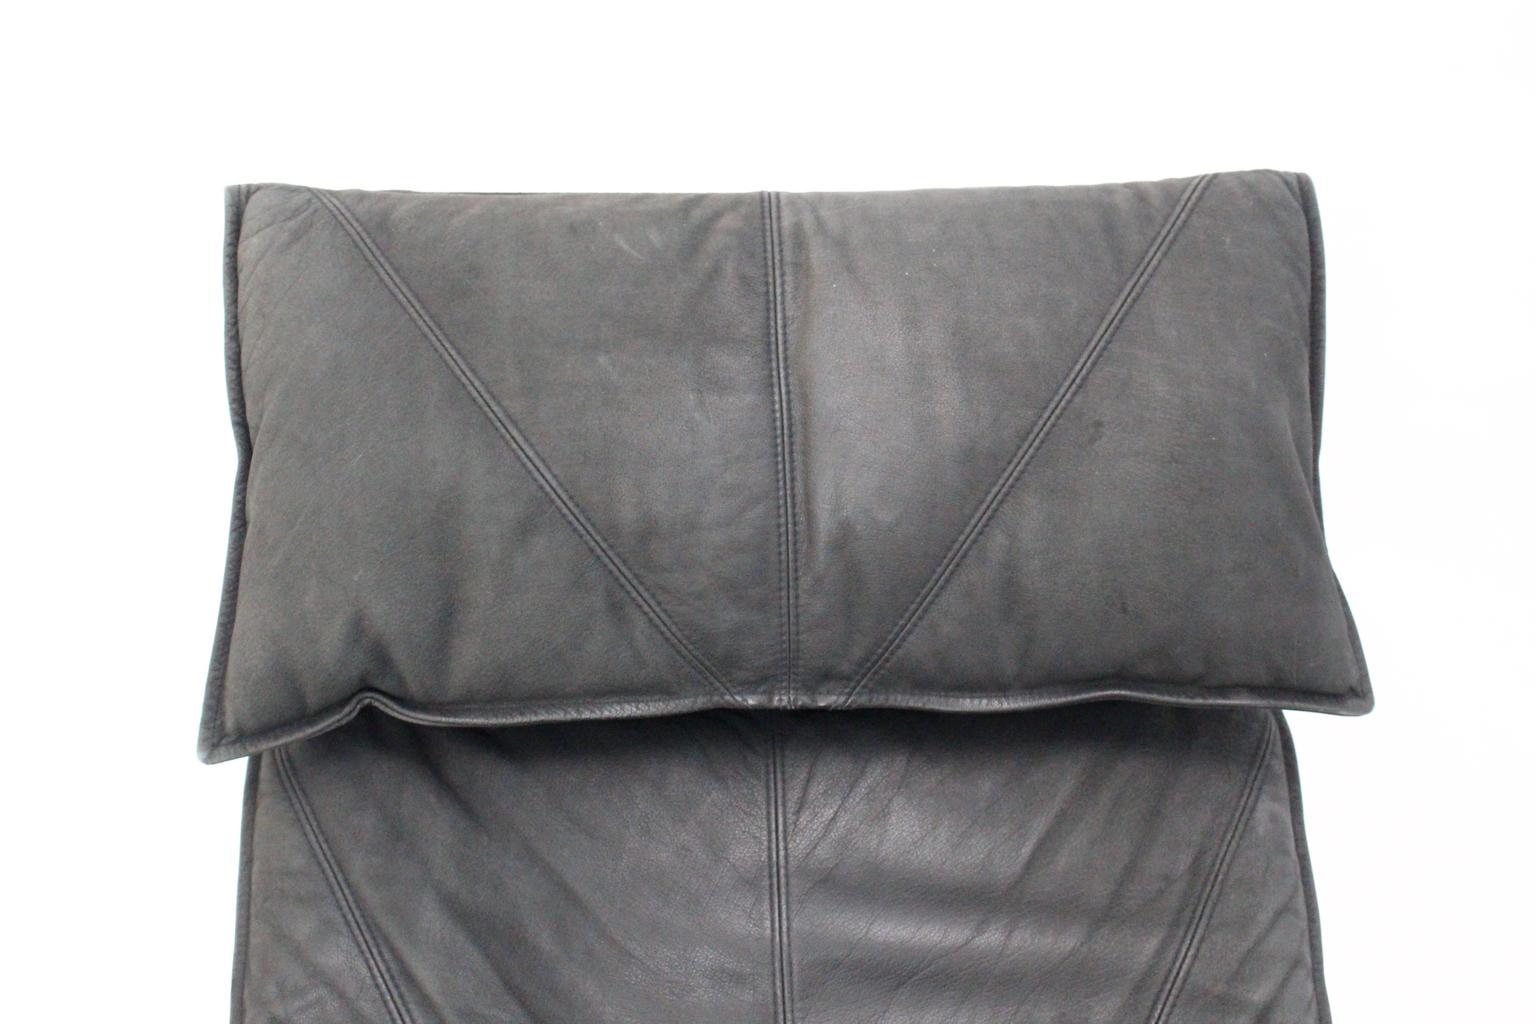 Mid-Century Modern Vintage Black Leather Chaise Longue by Tord Bjorklund, 1970 For Sale 4